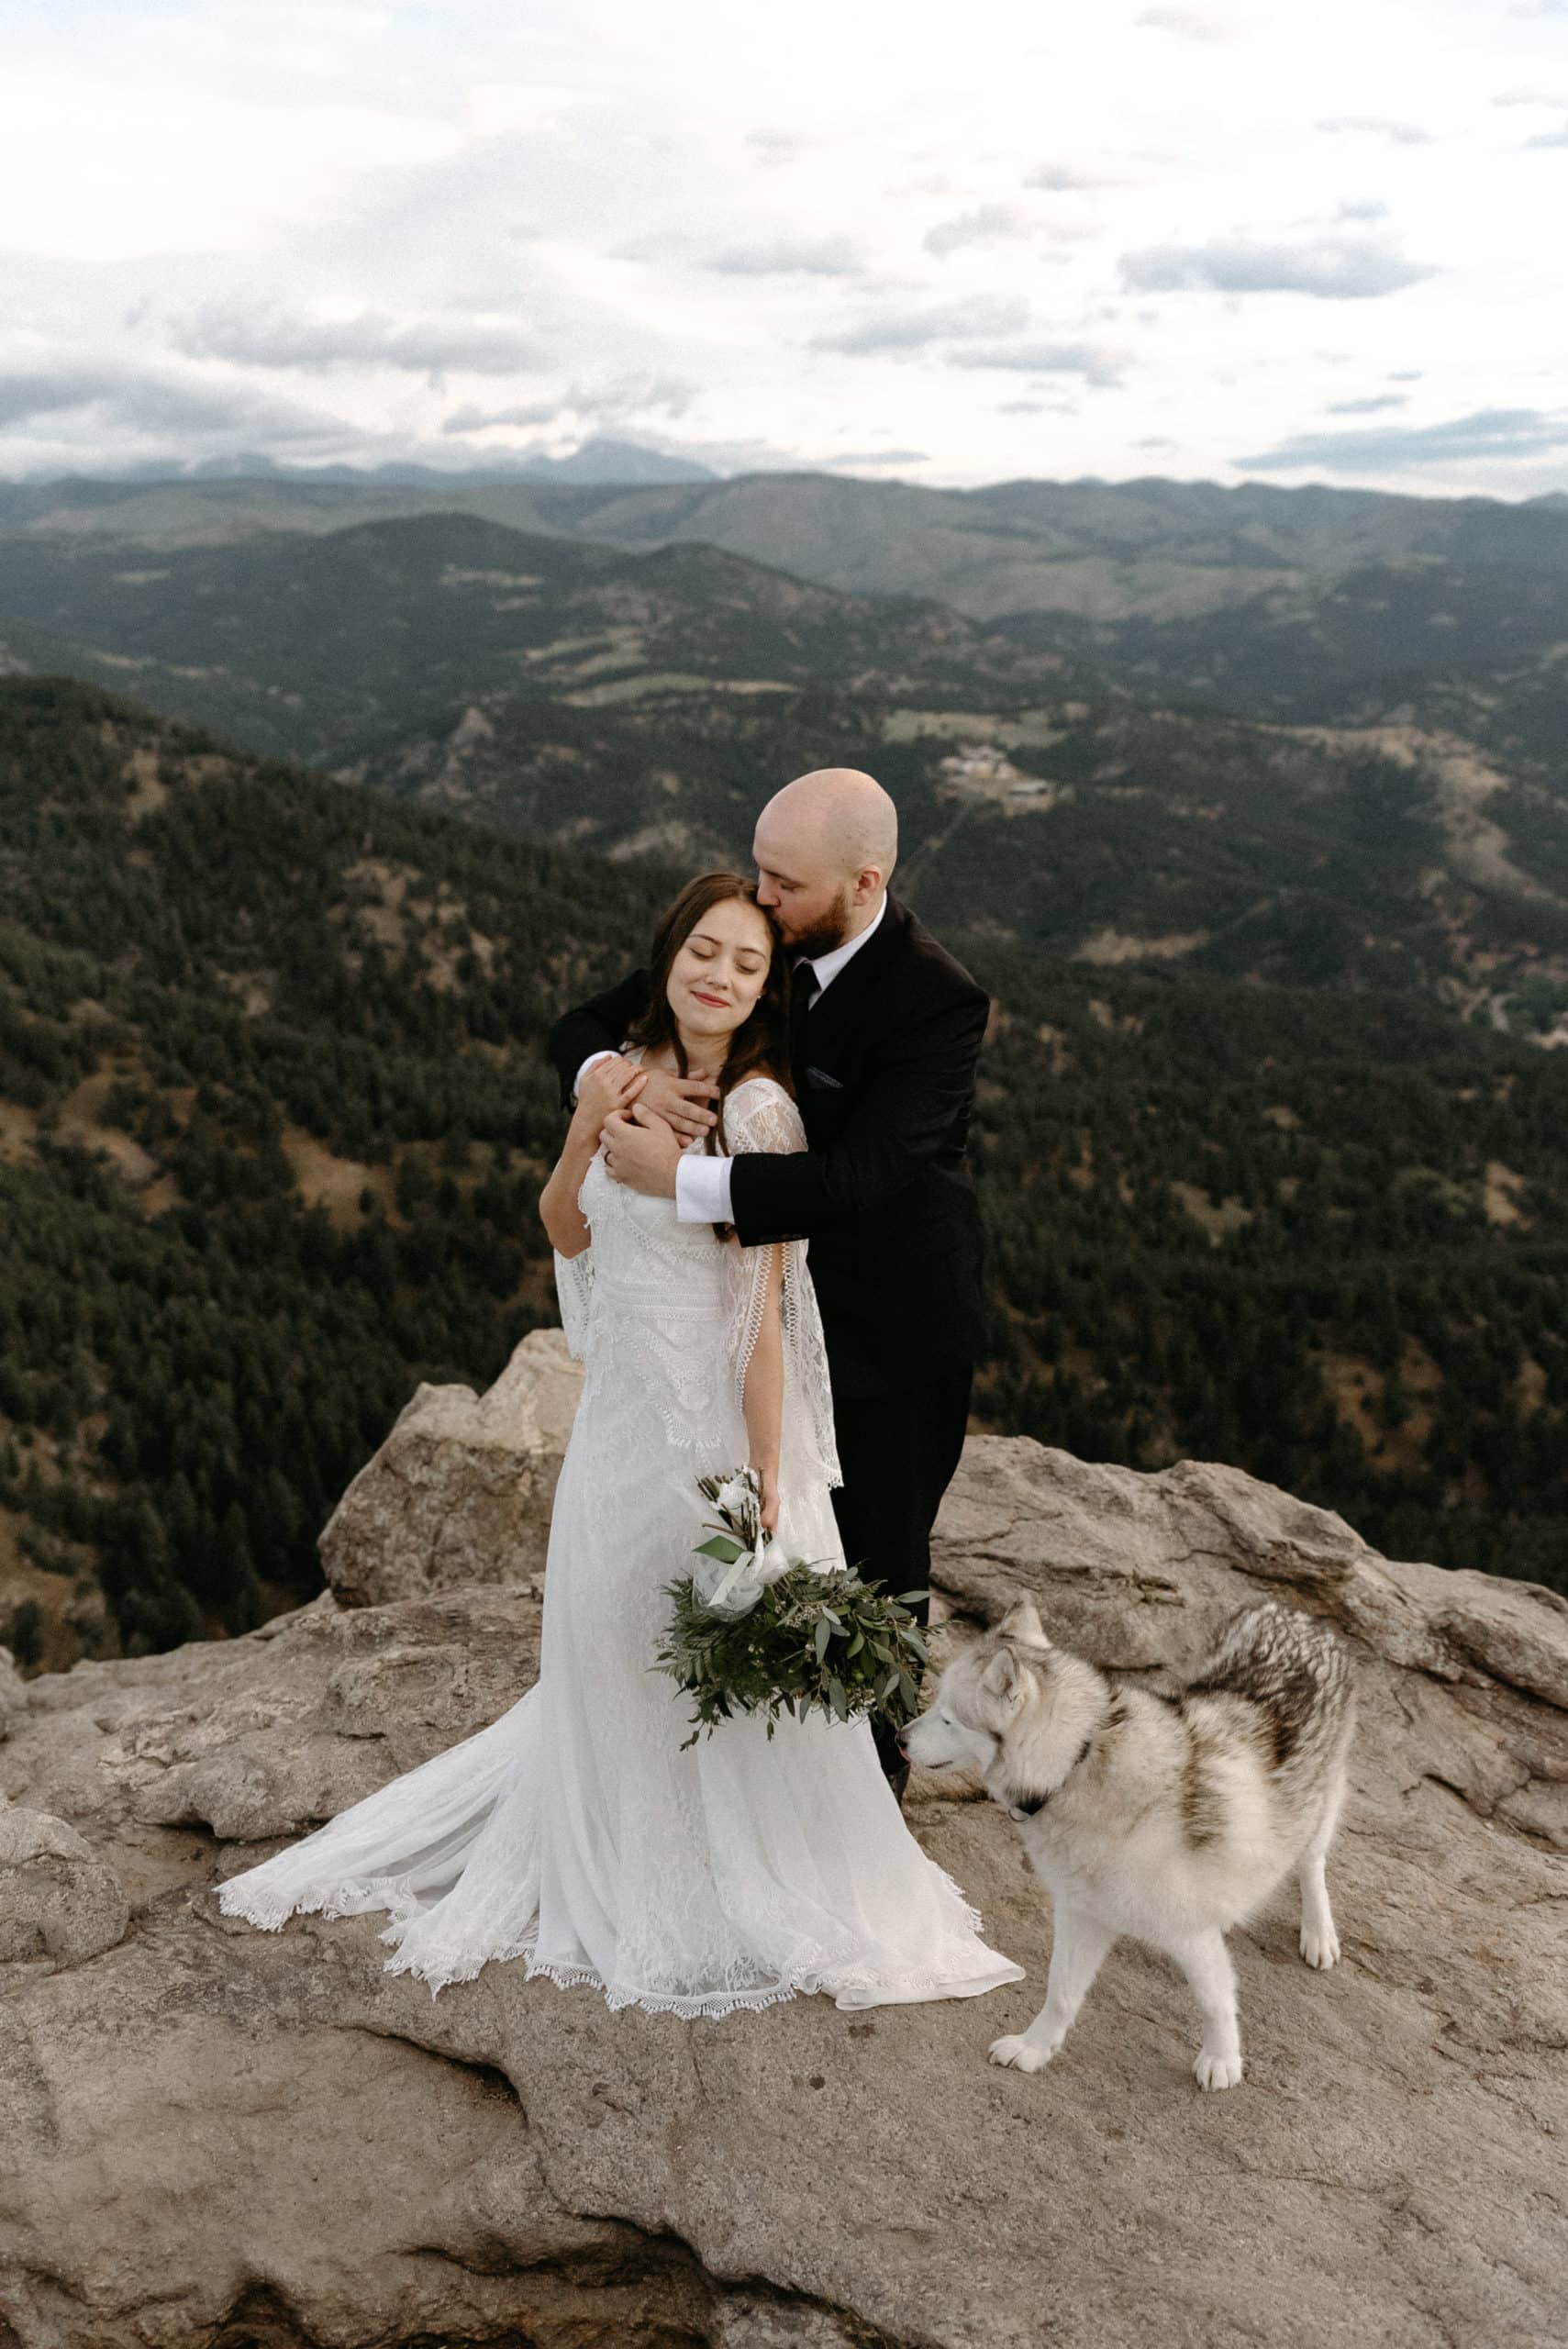 Boulder Colorado Wedding in the Mountains at Lost Gulch Overlook